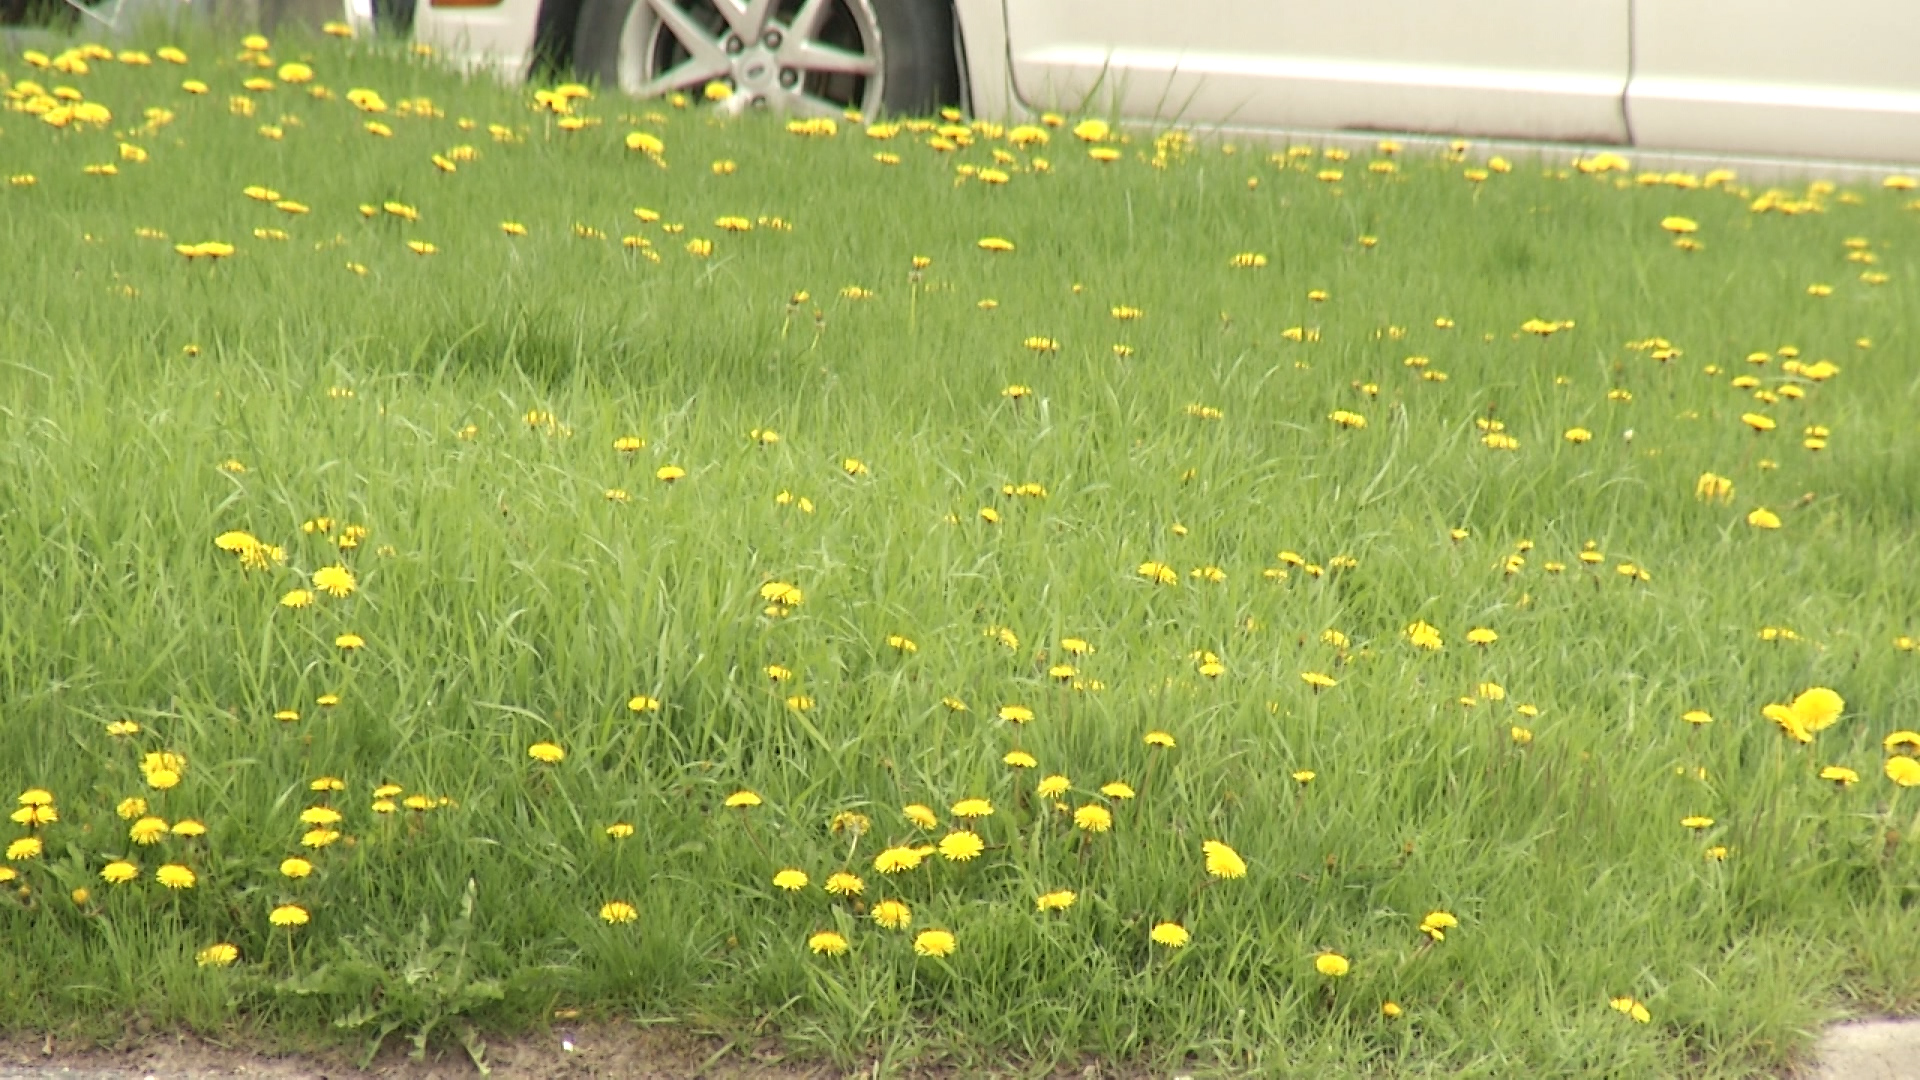 Kingston, Ont. introduces ‘No Mow May’ to help bee, insect populations